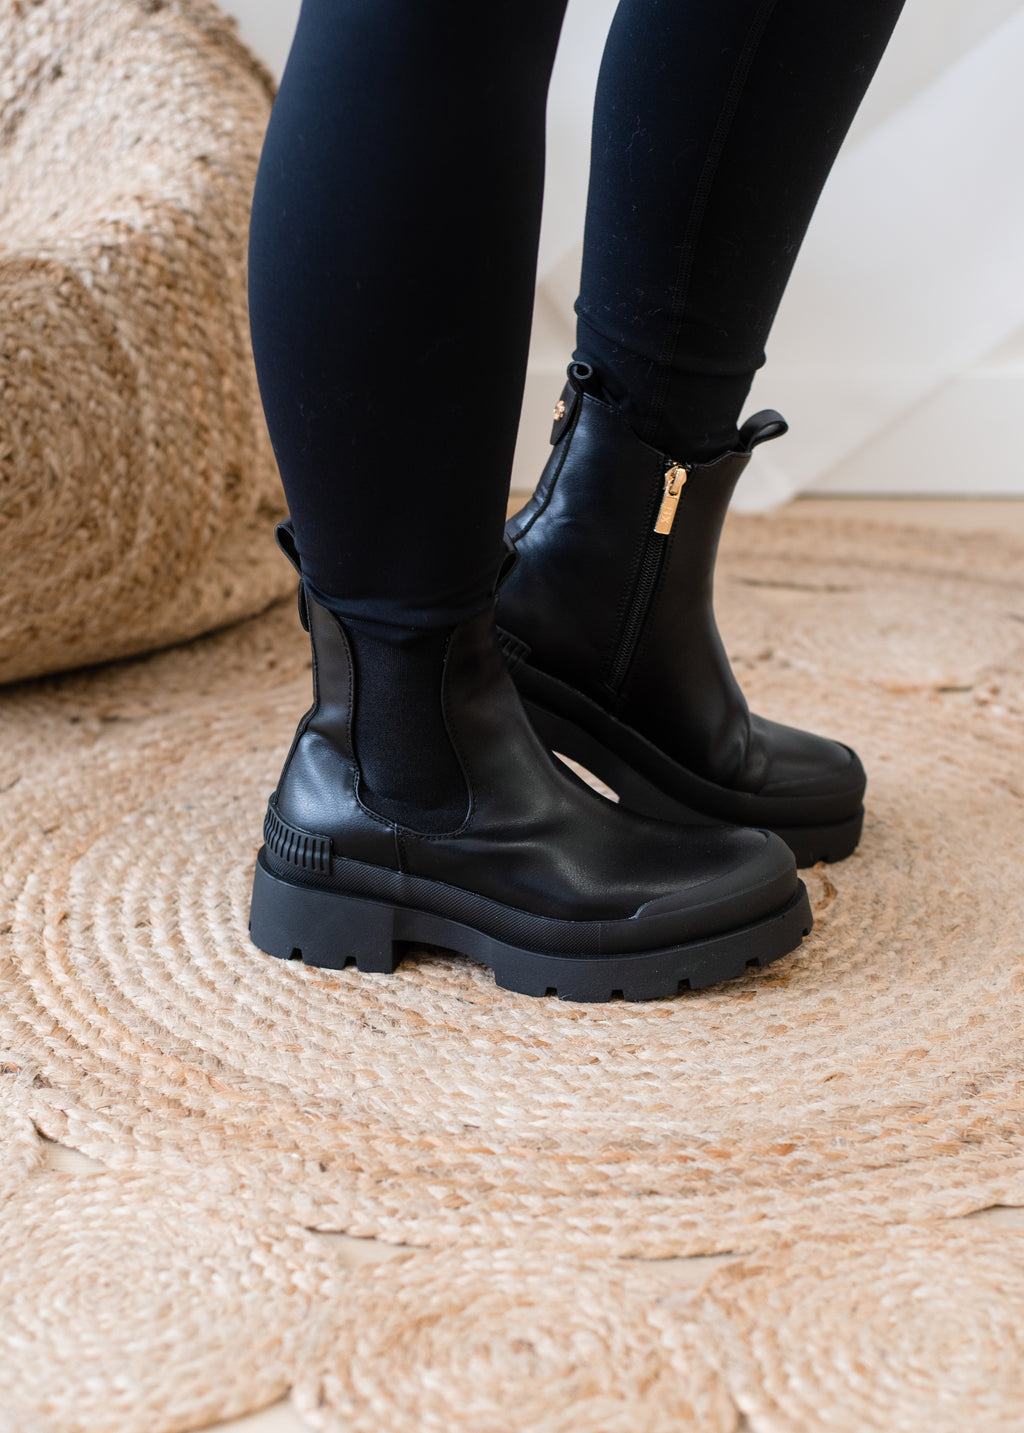 The Becca Boots